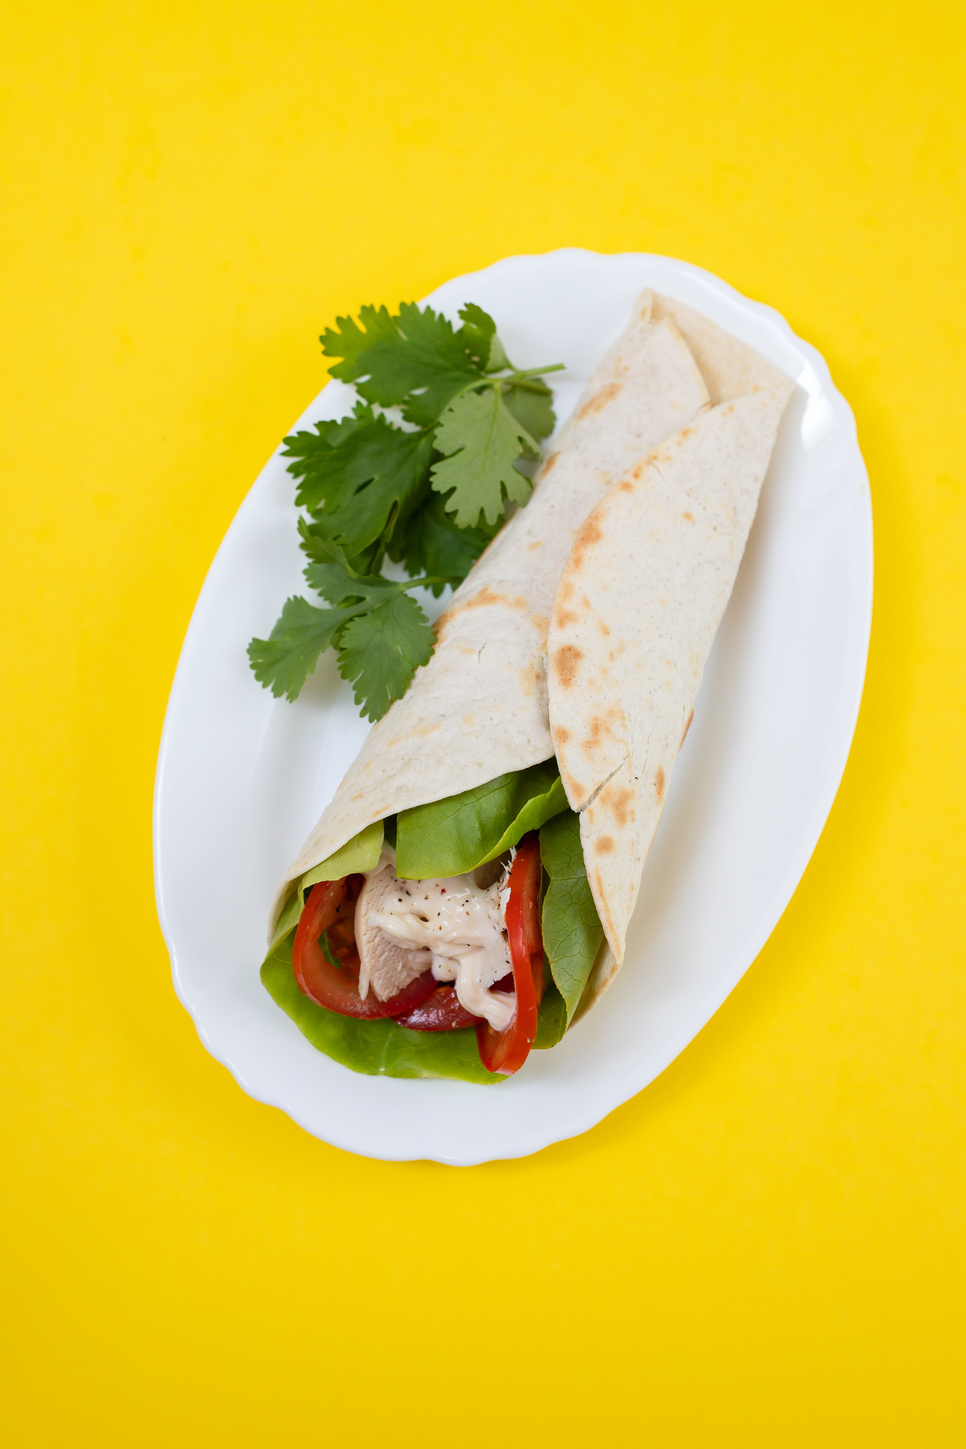 chicken and salad tortilla wraps on white dish on ceramic background